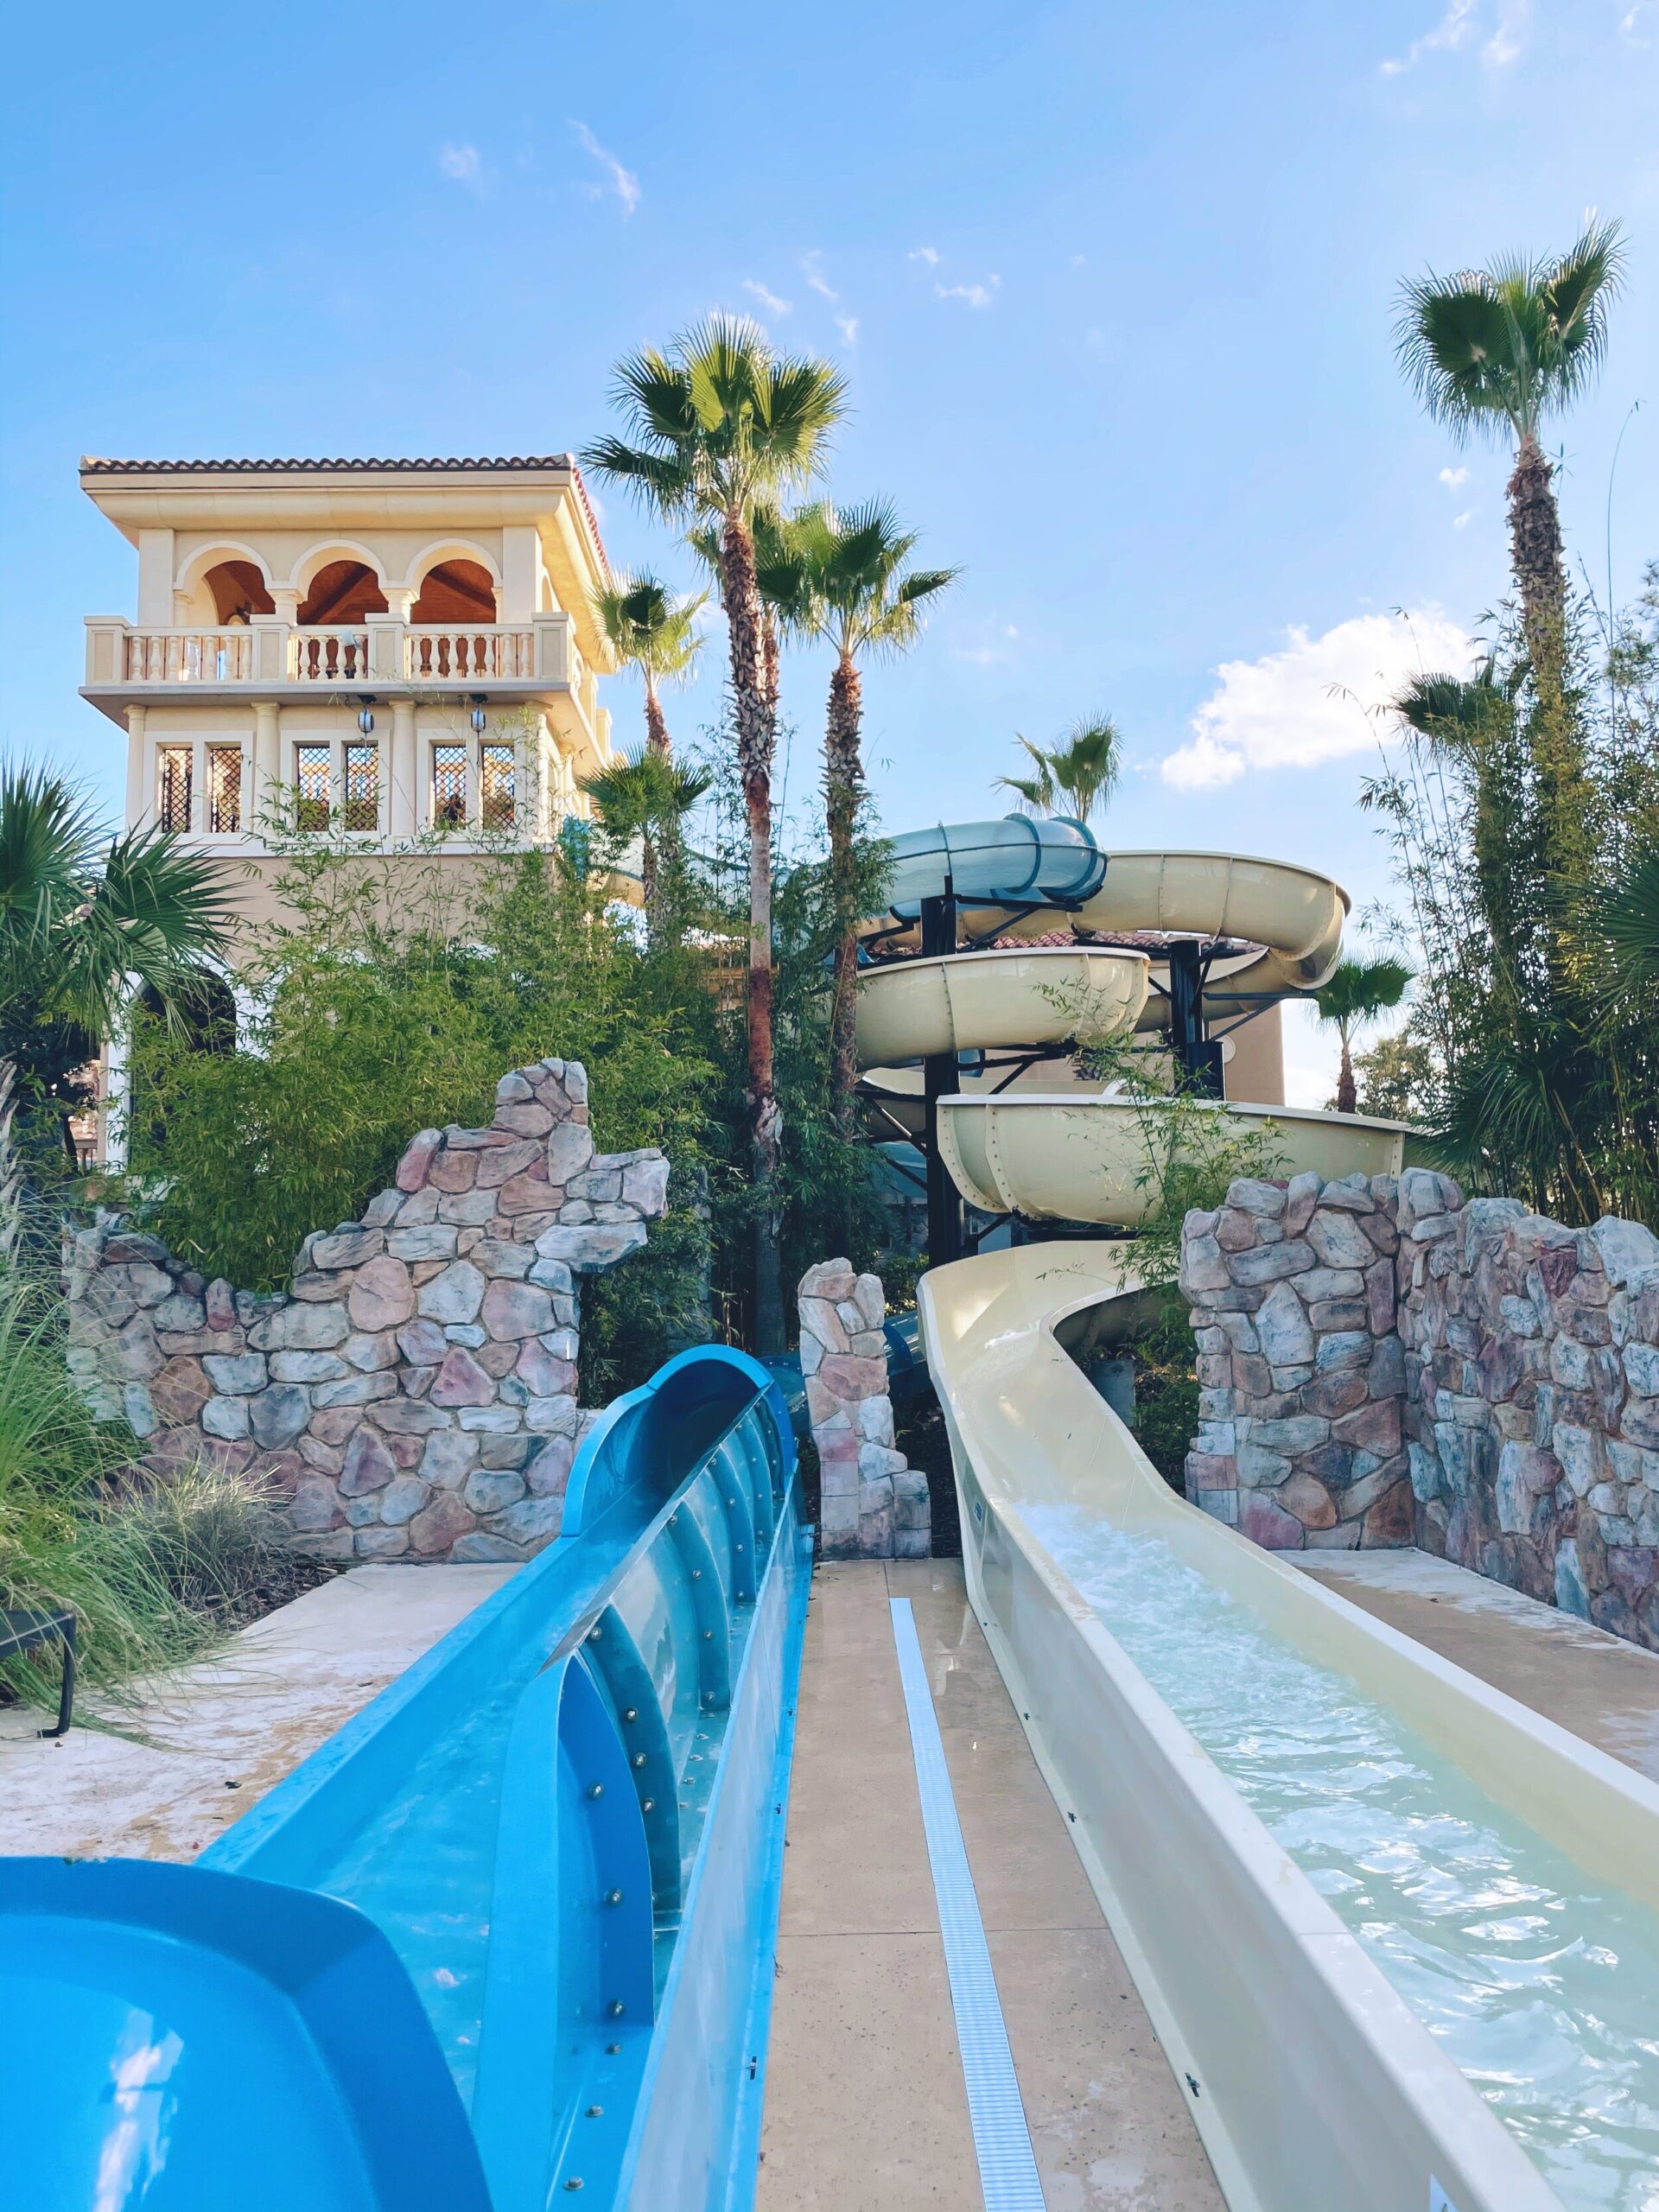 Two incredible water slides! You can’t see it in this photo, but there is also a rock wall just to left of the water slide.